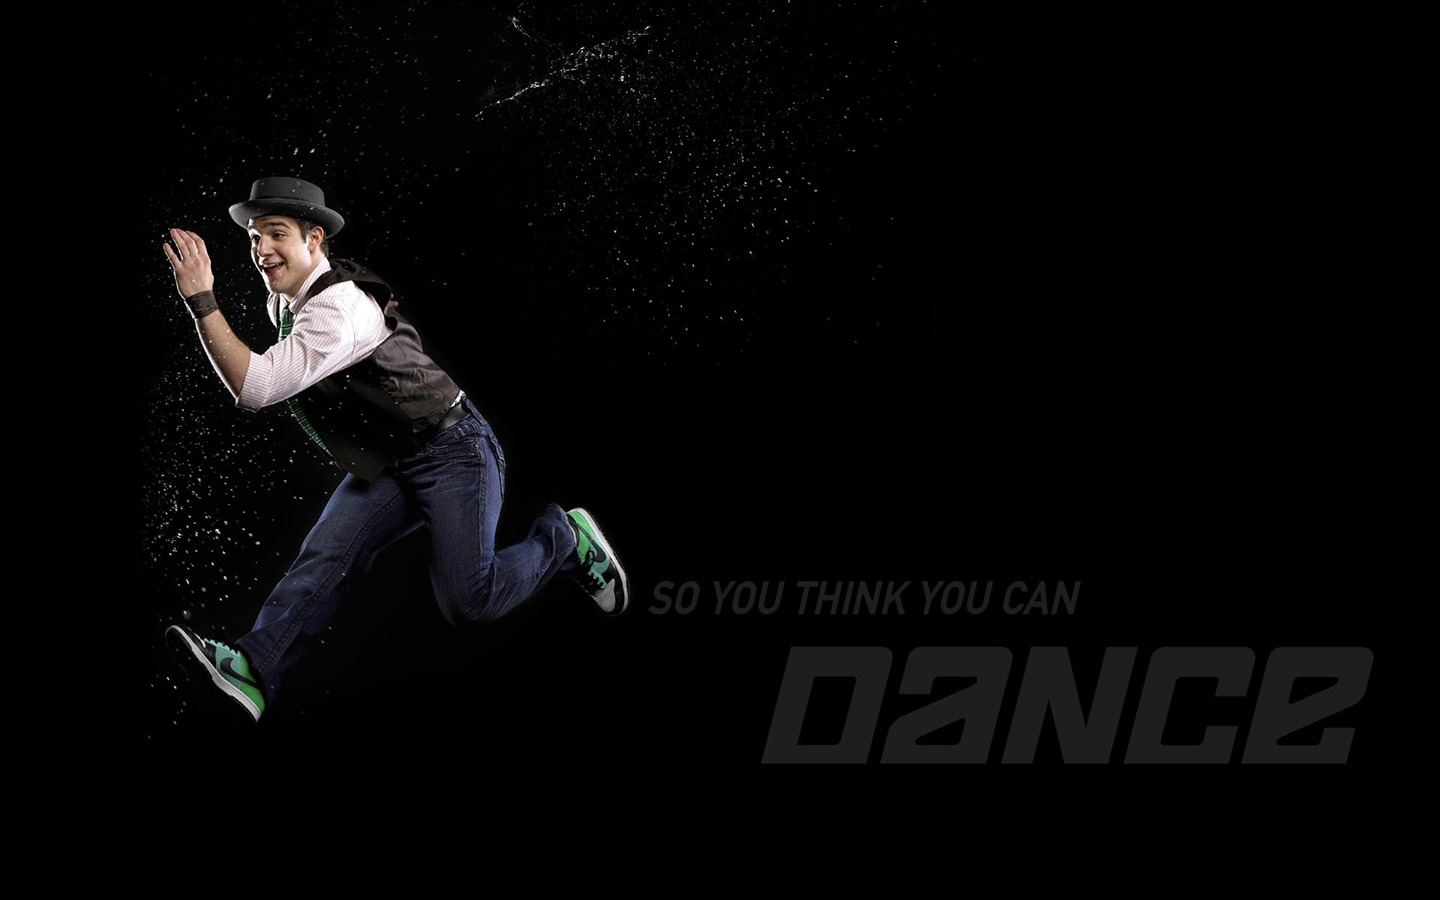 So You Think You Can Dance 舞林争霸 壁纸(一)14 - 1440x900